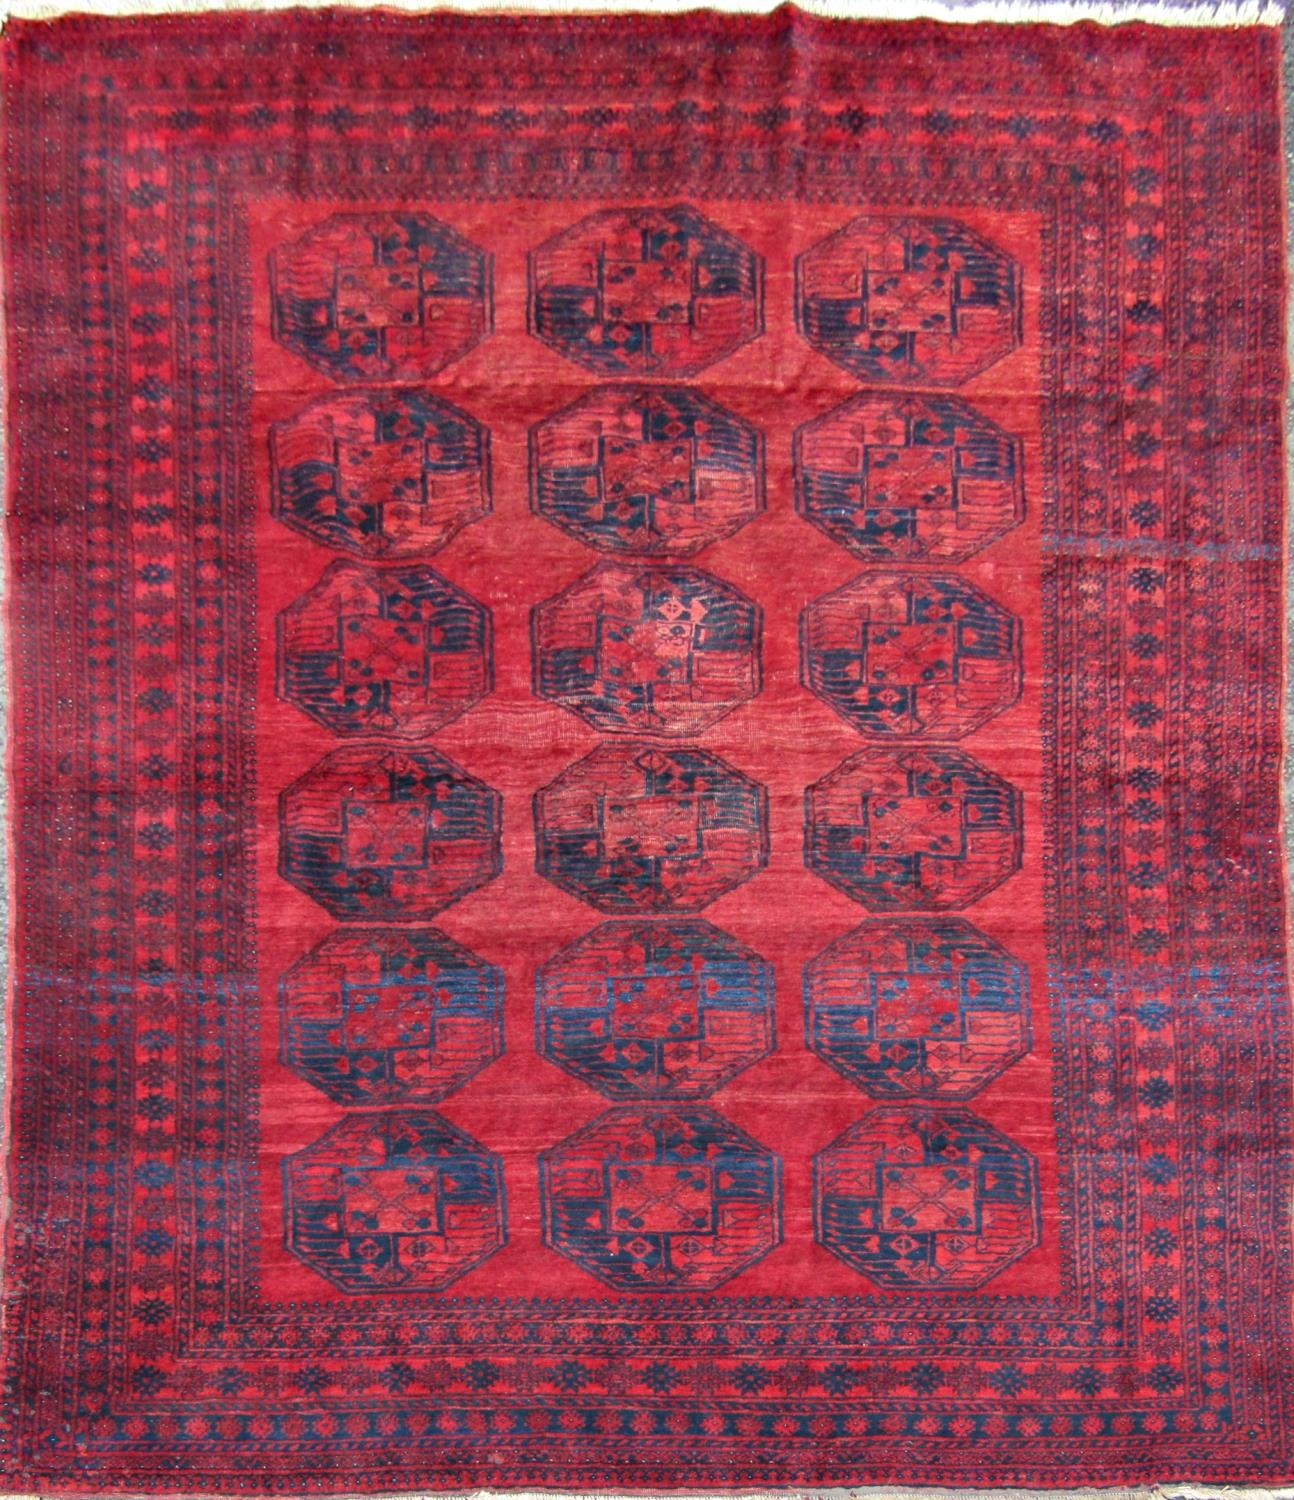 A large Afghan designed carpet with a central panel of elephant feet on a red ground. 310cm x